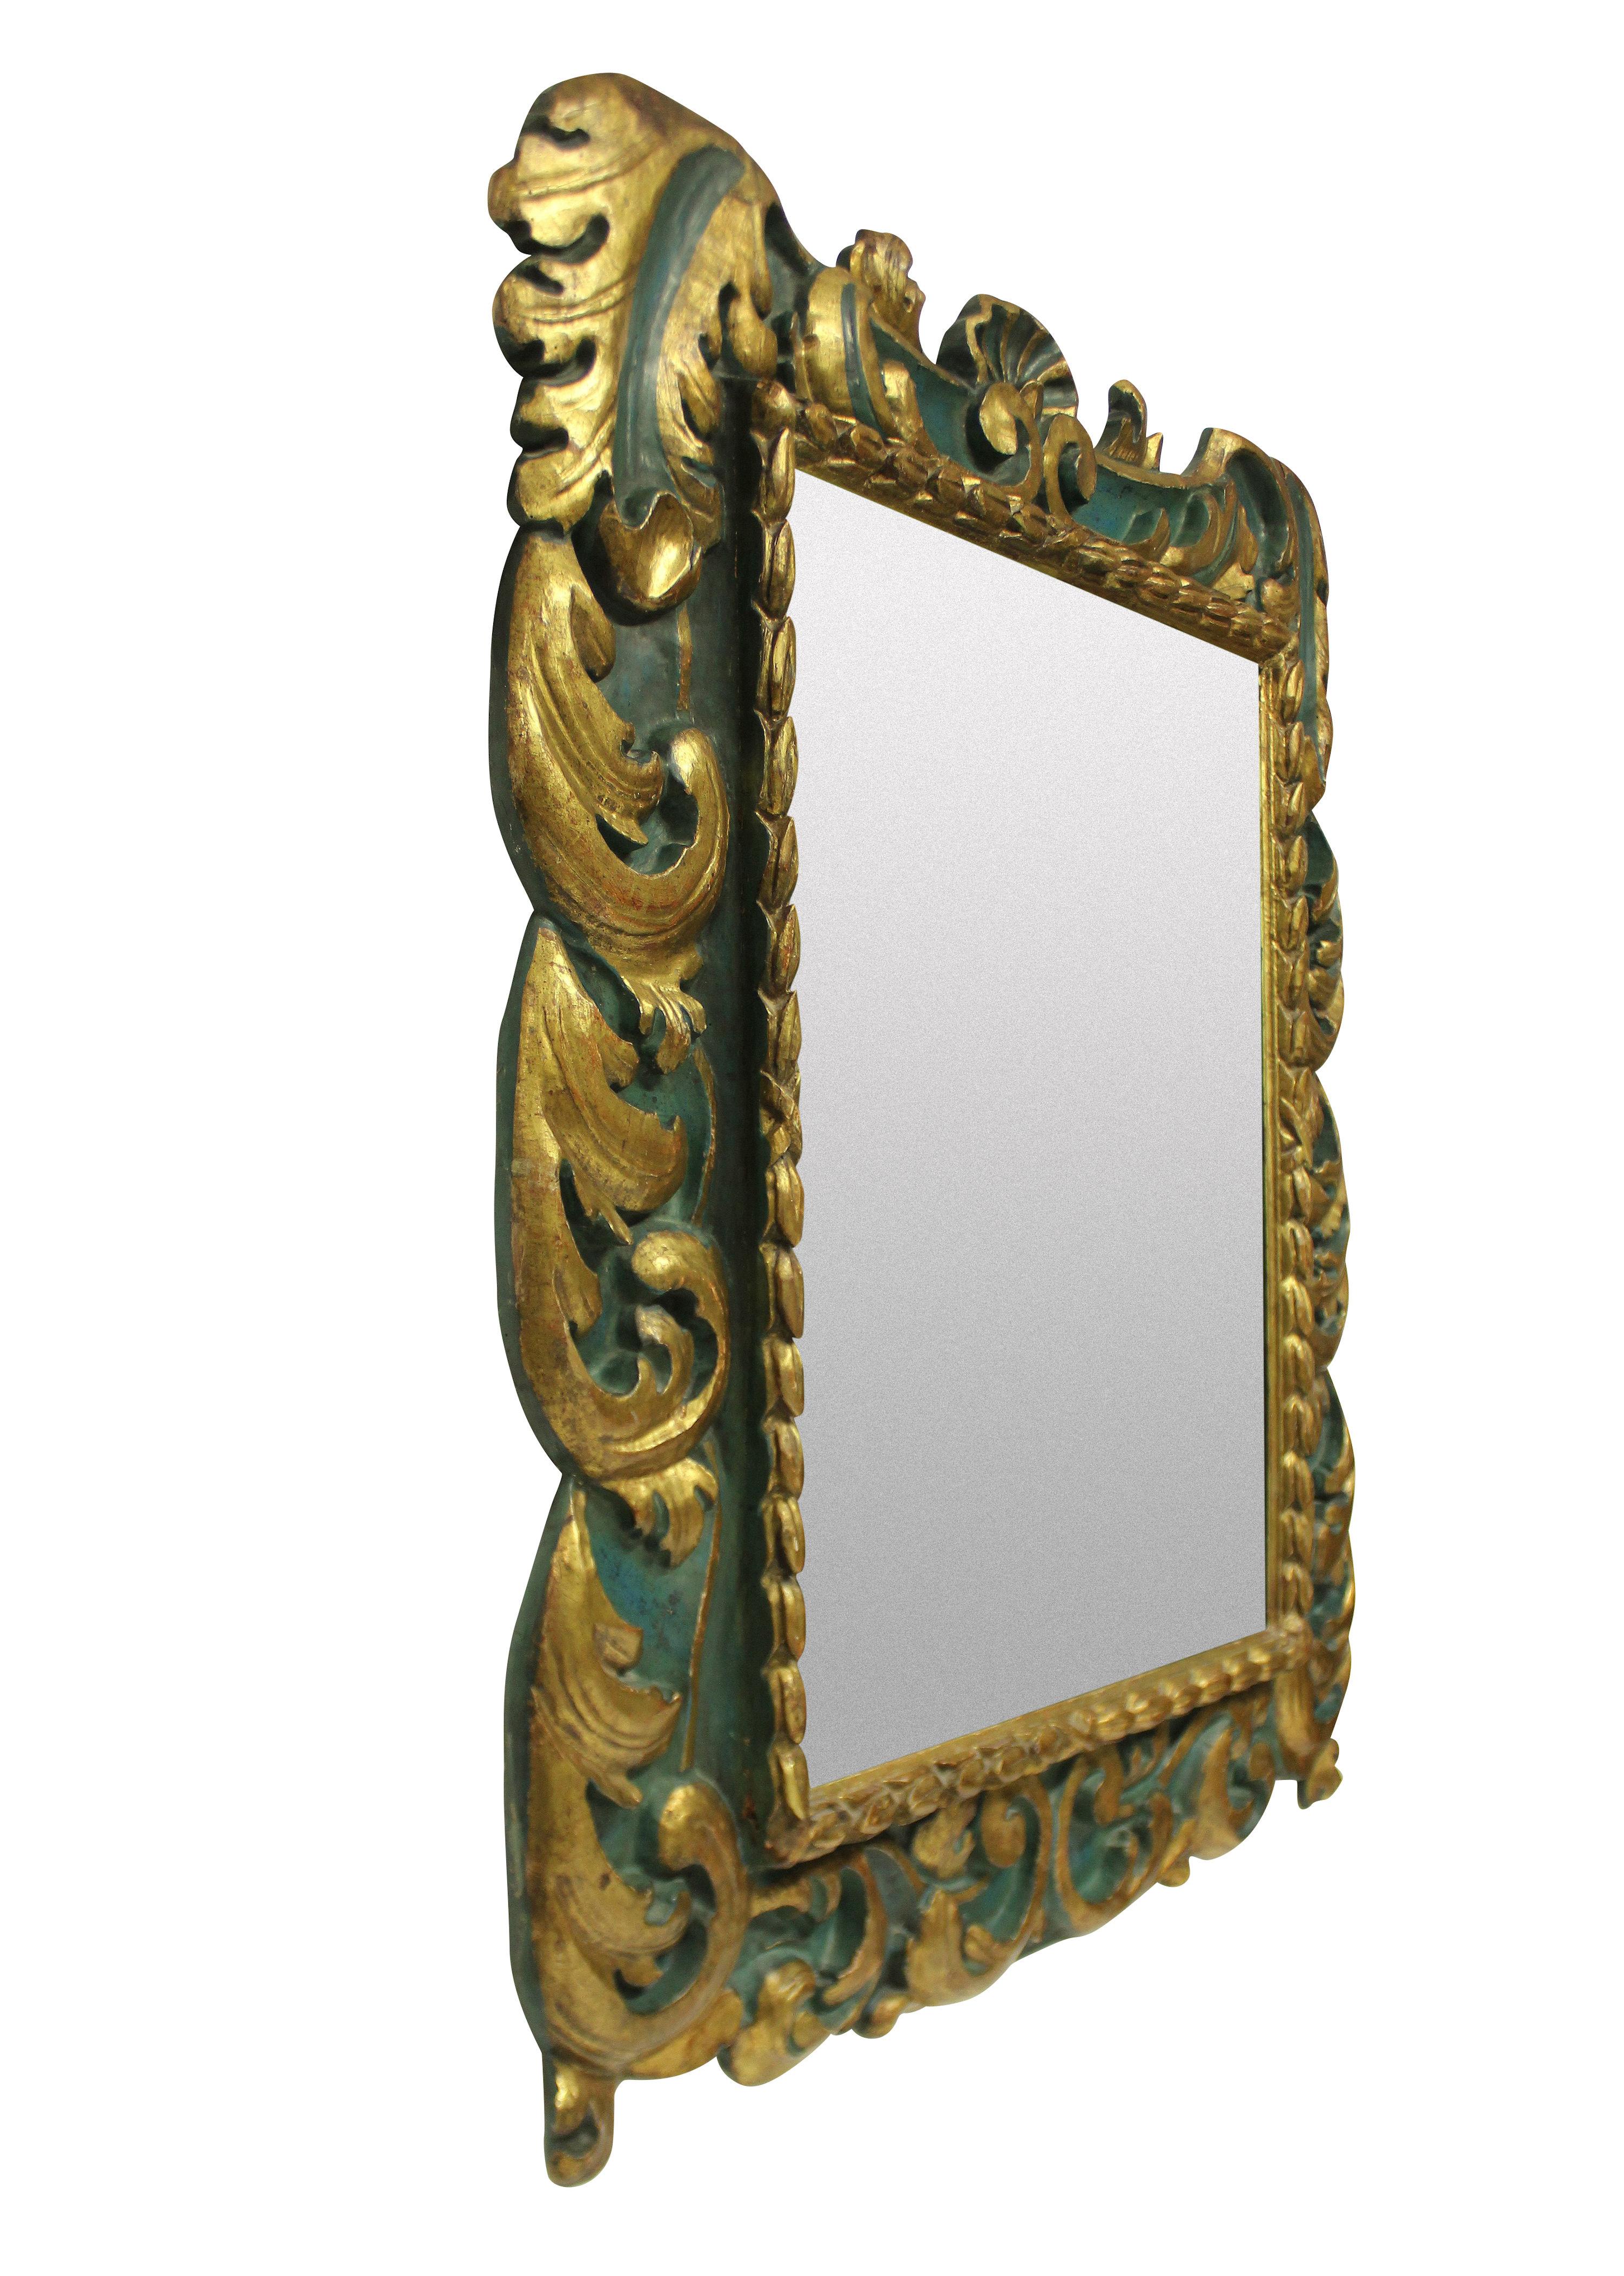 A large Spanish decorative, carved, painted and gilded mirror, with blue/green paints and a later plate.